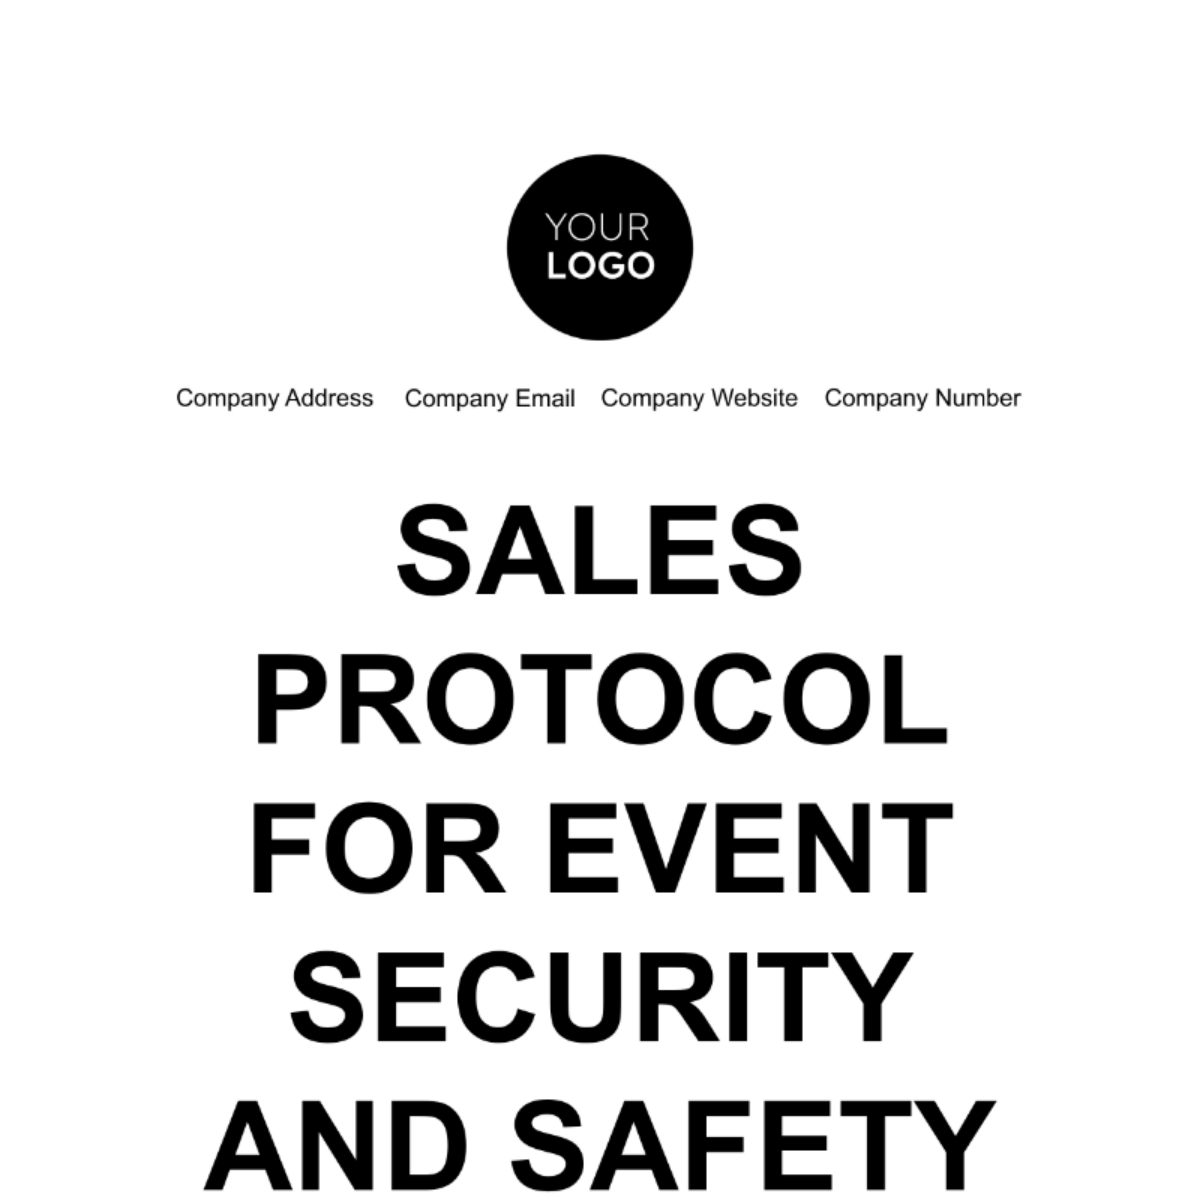 Sales Protocol for Event Security and Safety Template